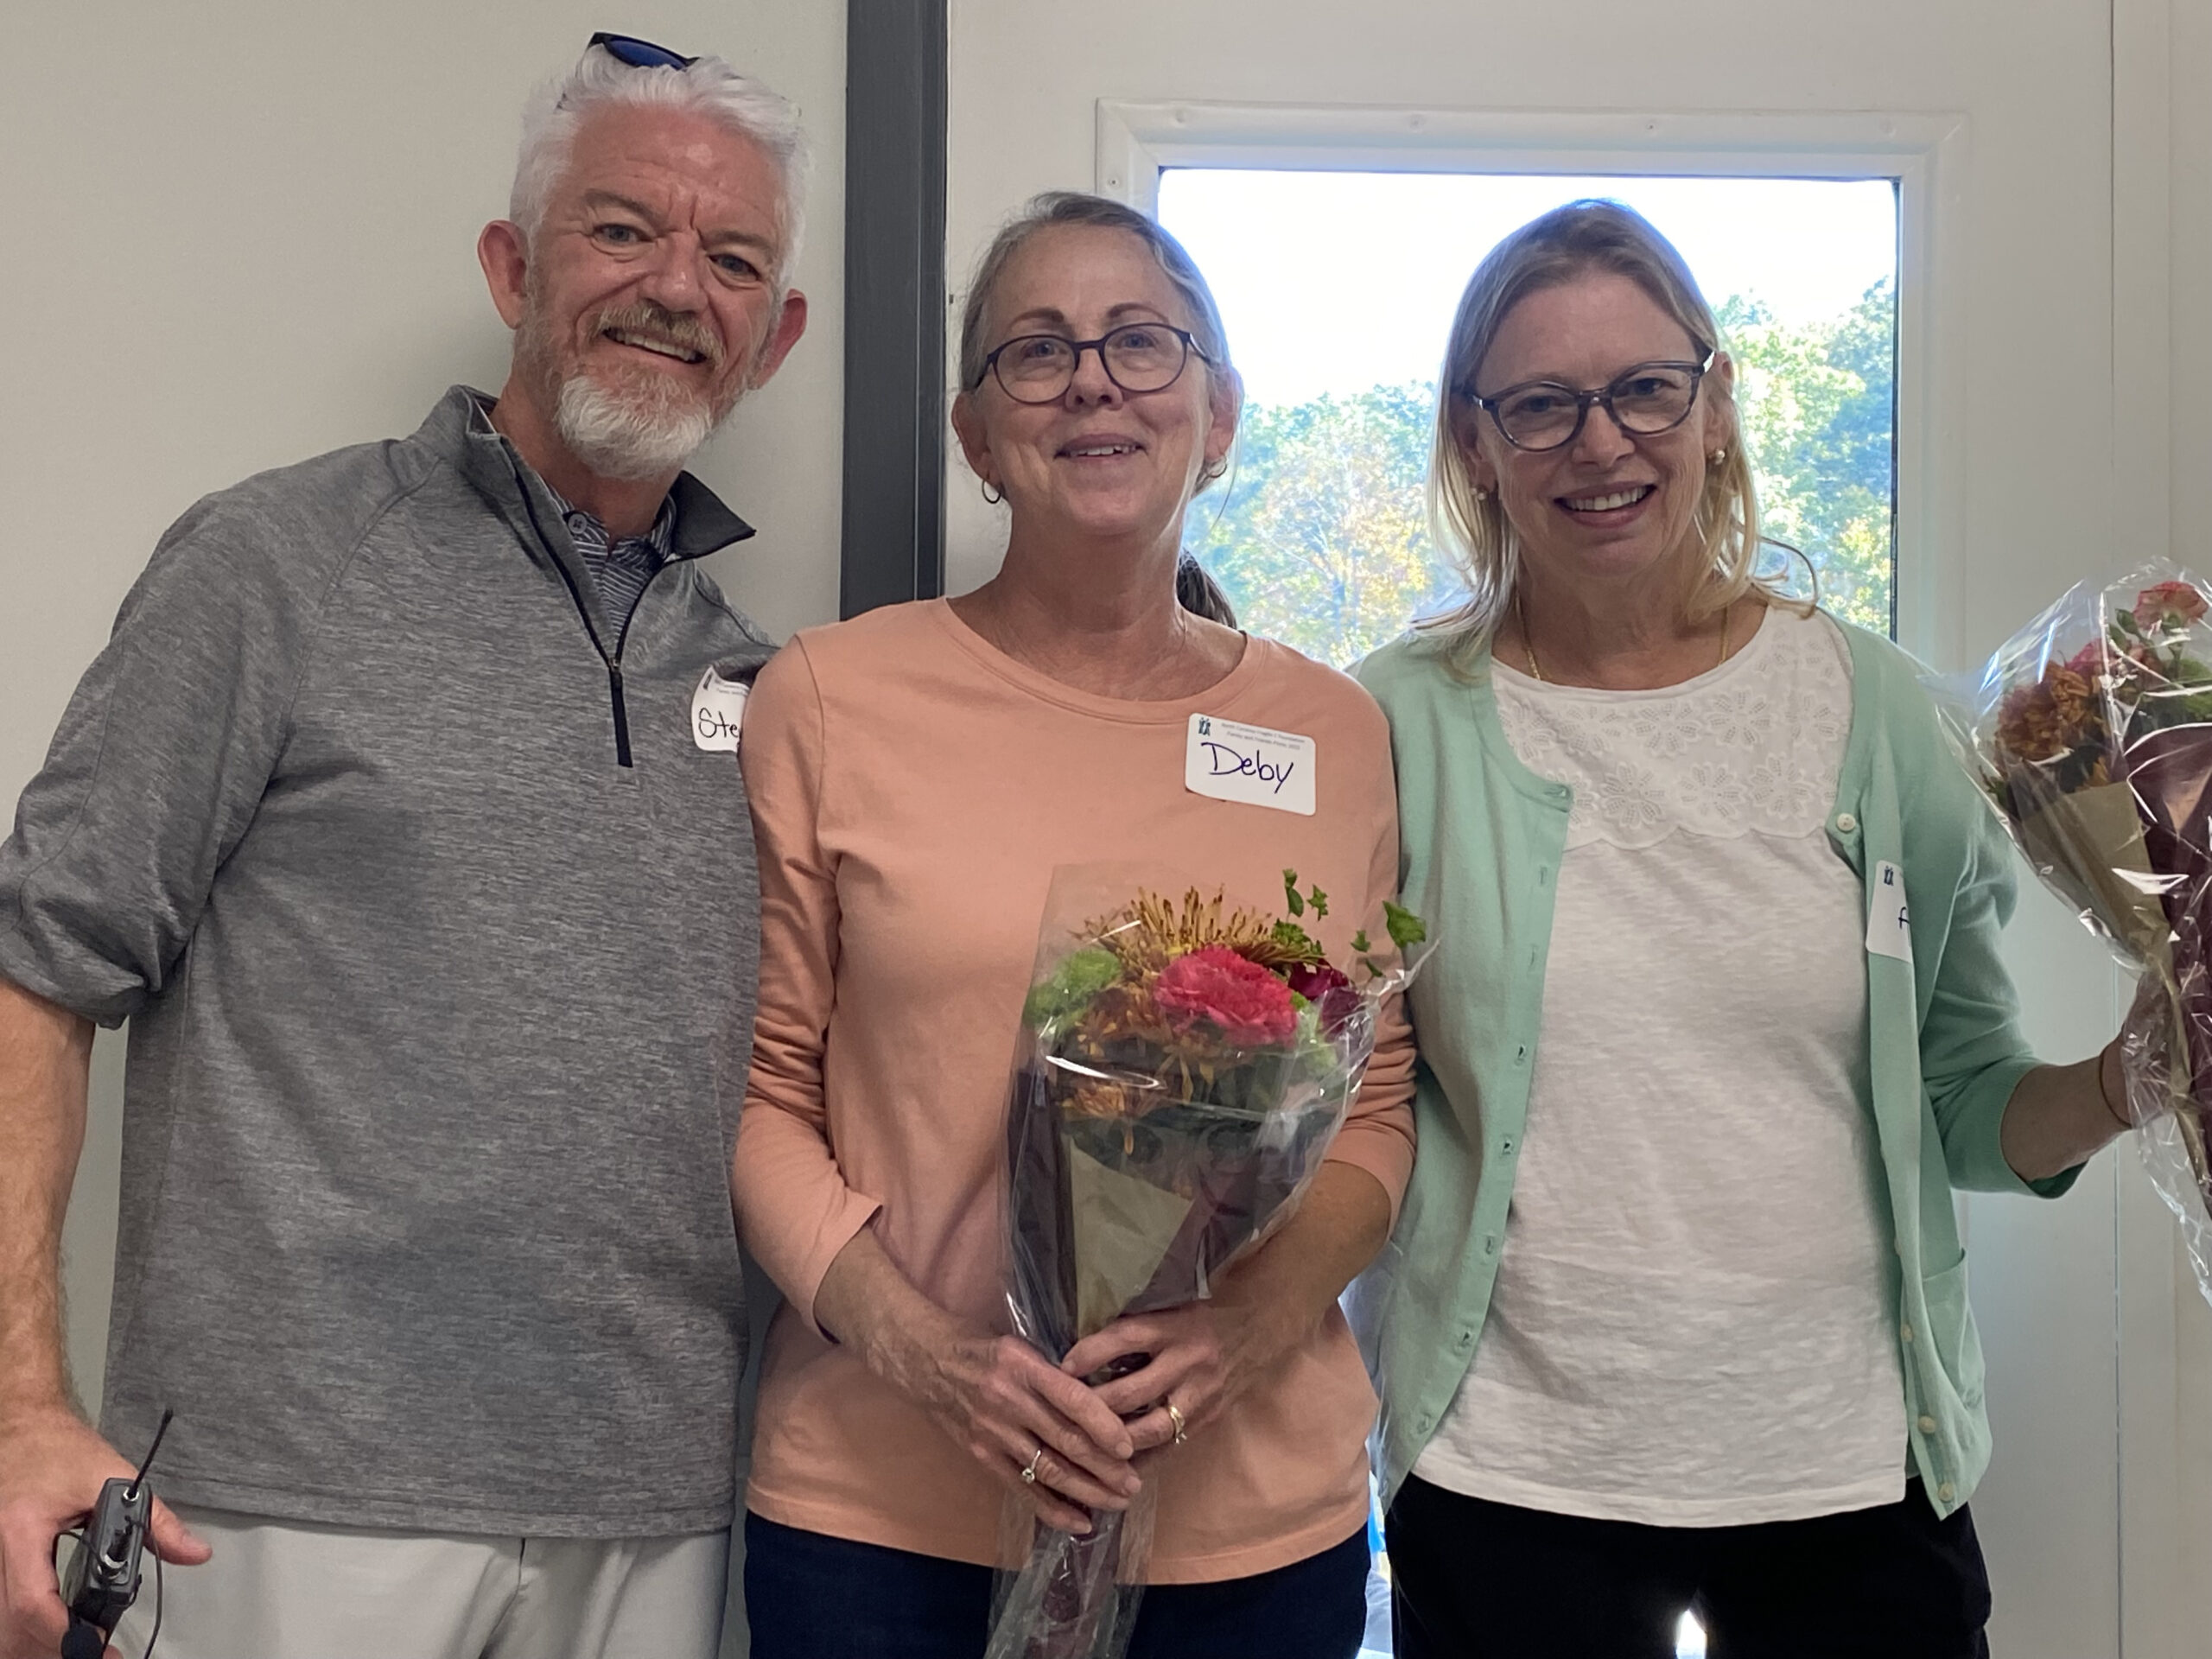 NCFXF President Steve Strom (L) thanked Deby Burgess (Center) and Dr. Ave M. Lachiewicz (R) for their many years of service to the Fragile X community.